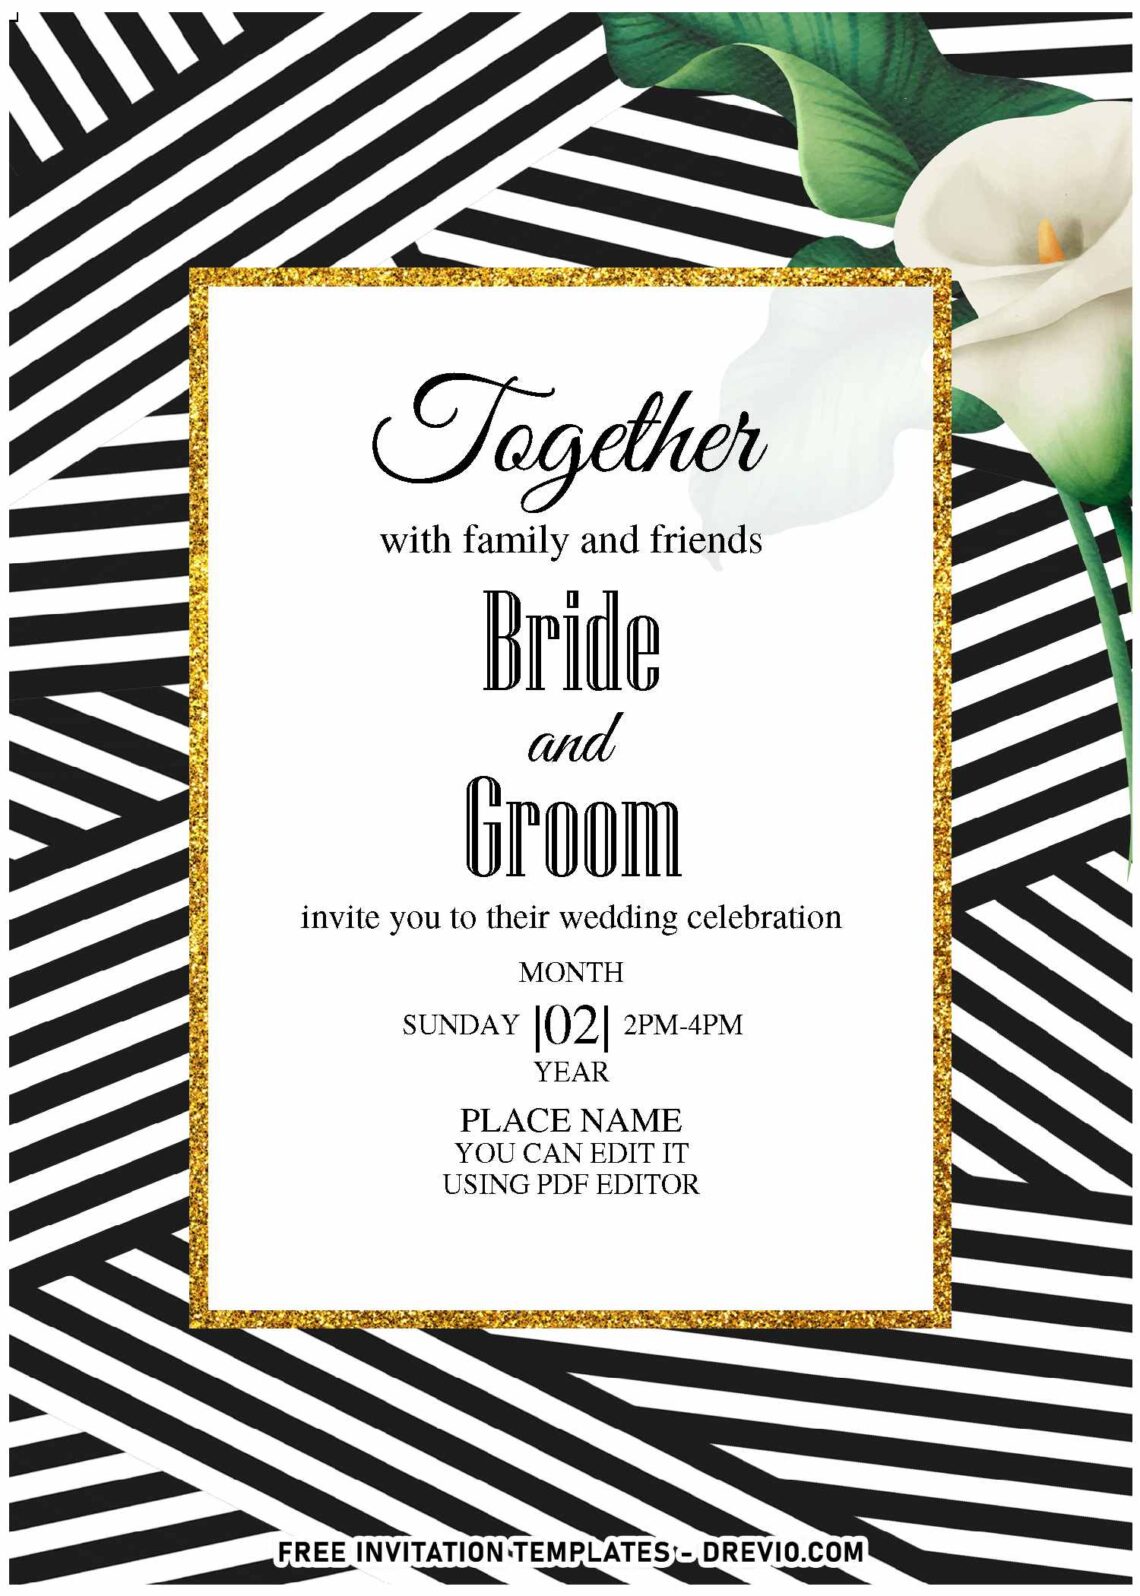 (Free Editable PDF) Urban Glamour Stripe And Gold Wedding Invitation Templates with black and white ribbon stripes background